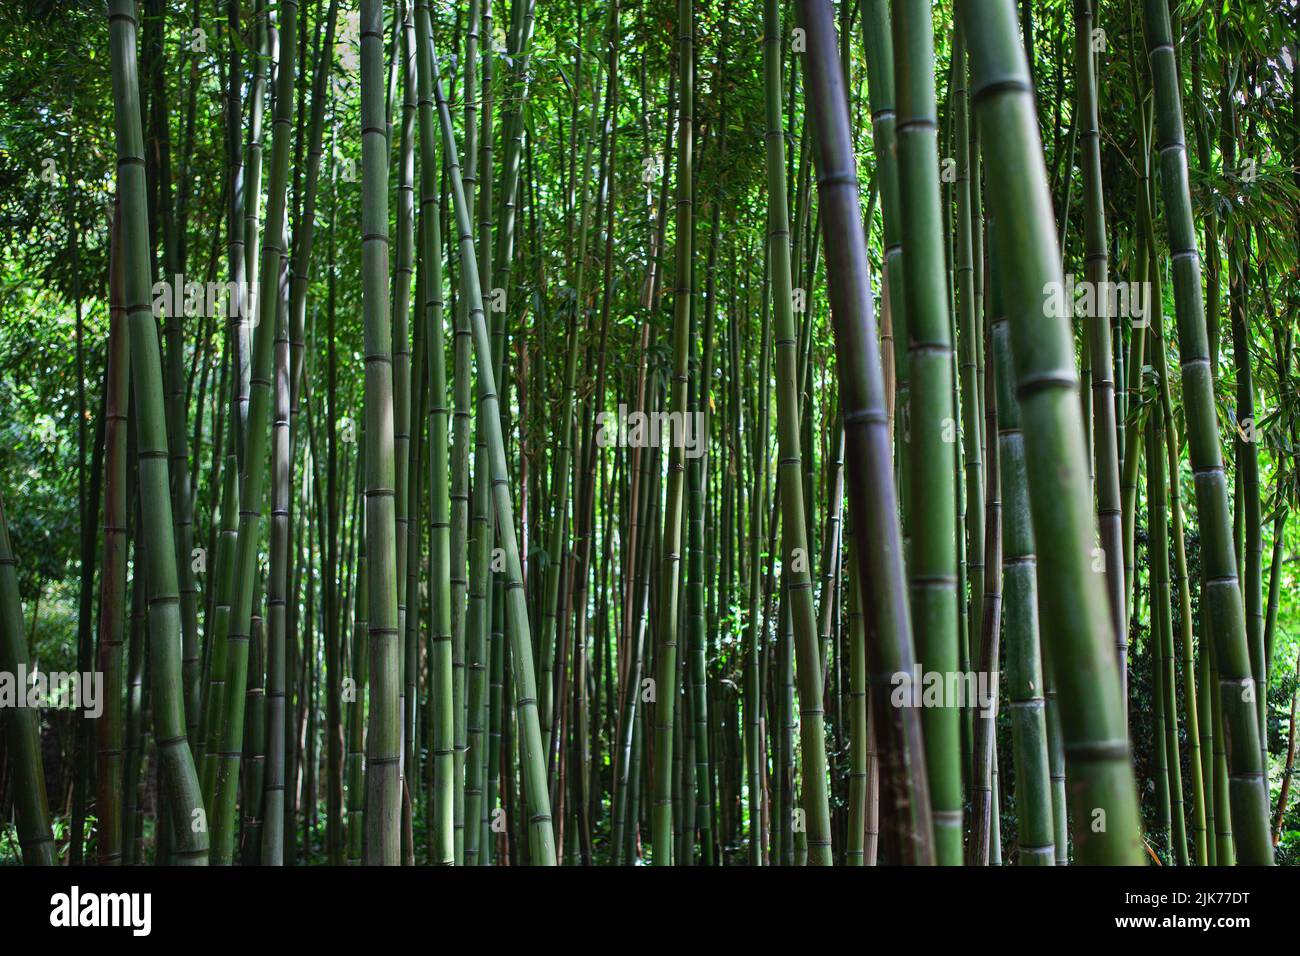 Bamboo background in a public park Stock Photo